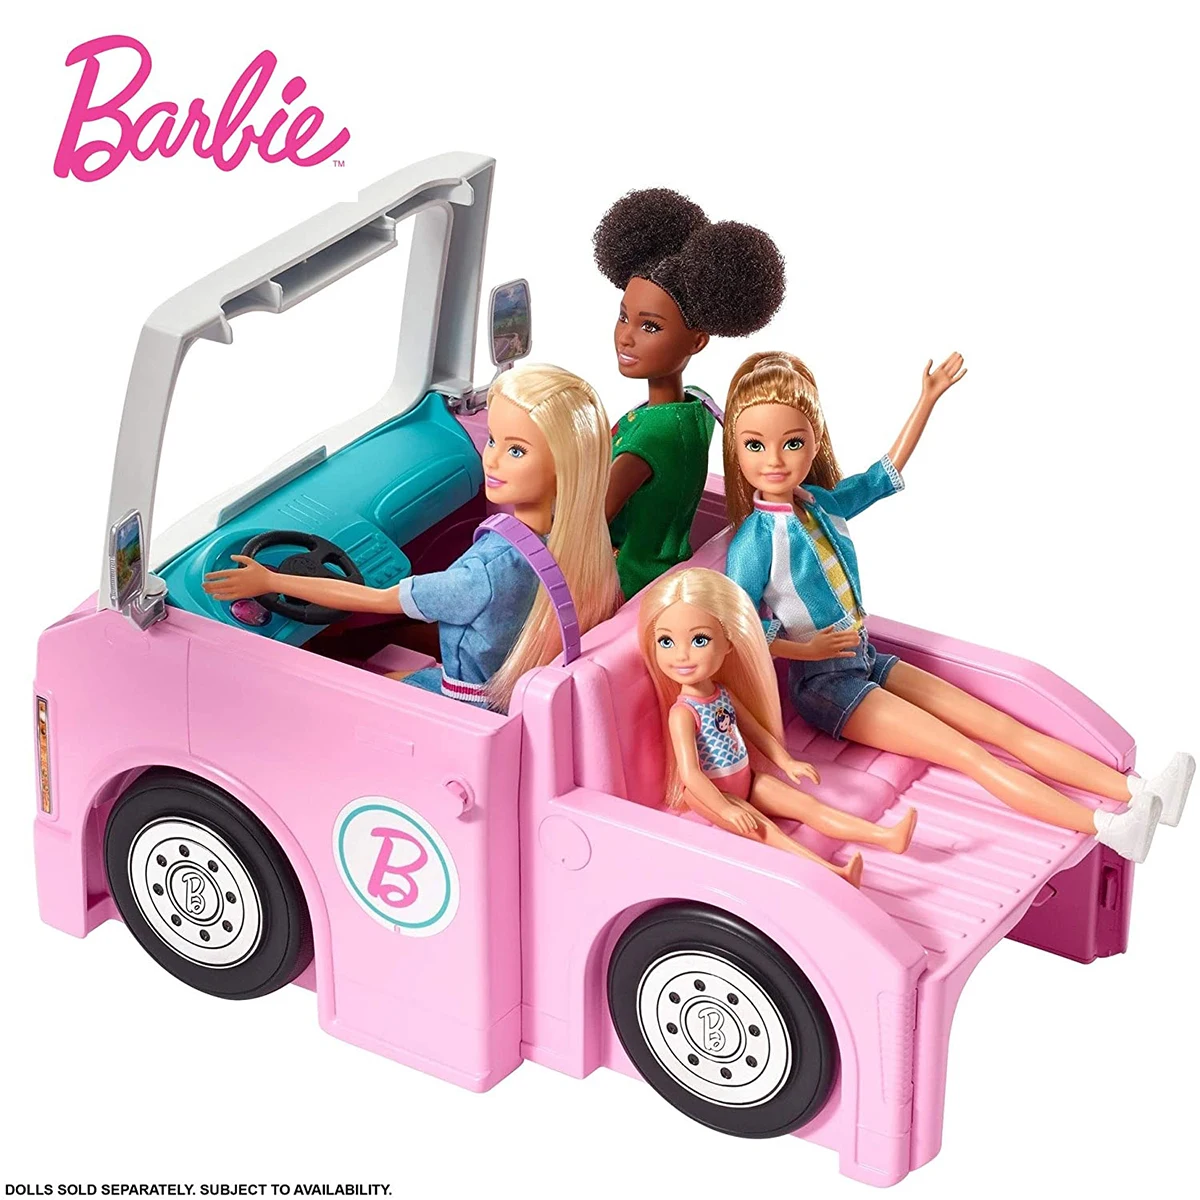 Barbie Dream Camper RV Pink Pop Out Caravan For Dolls With Accessories Play Set 